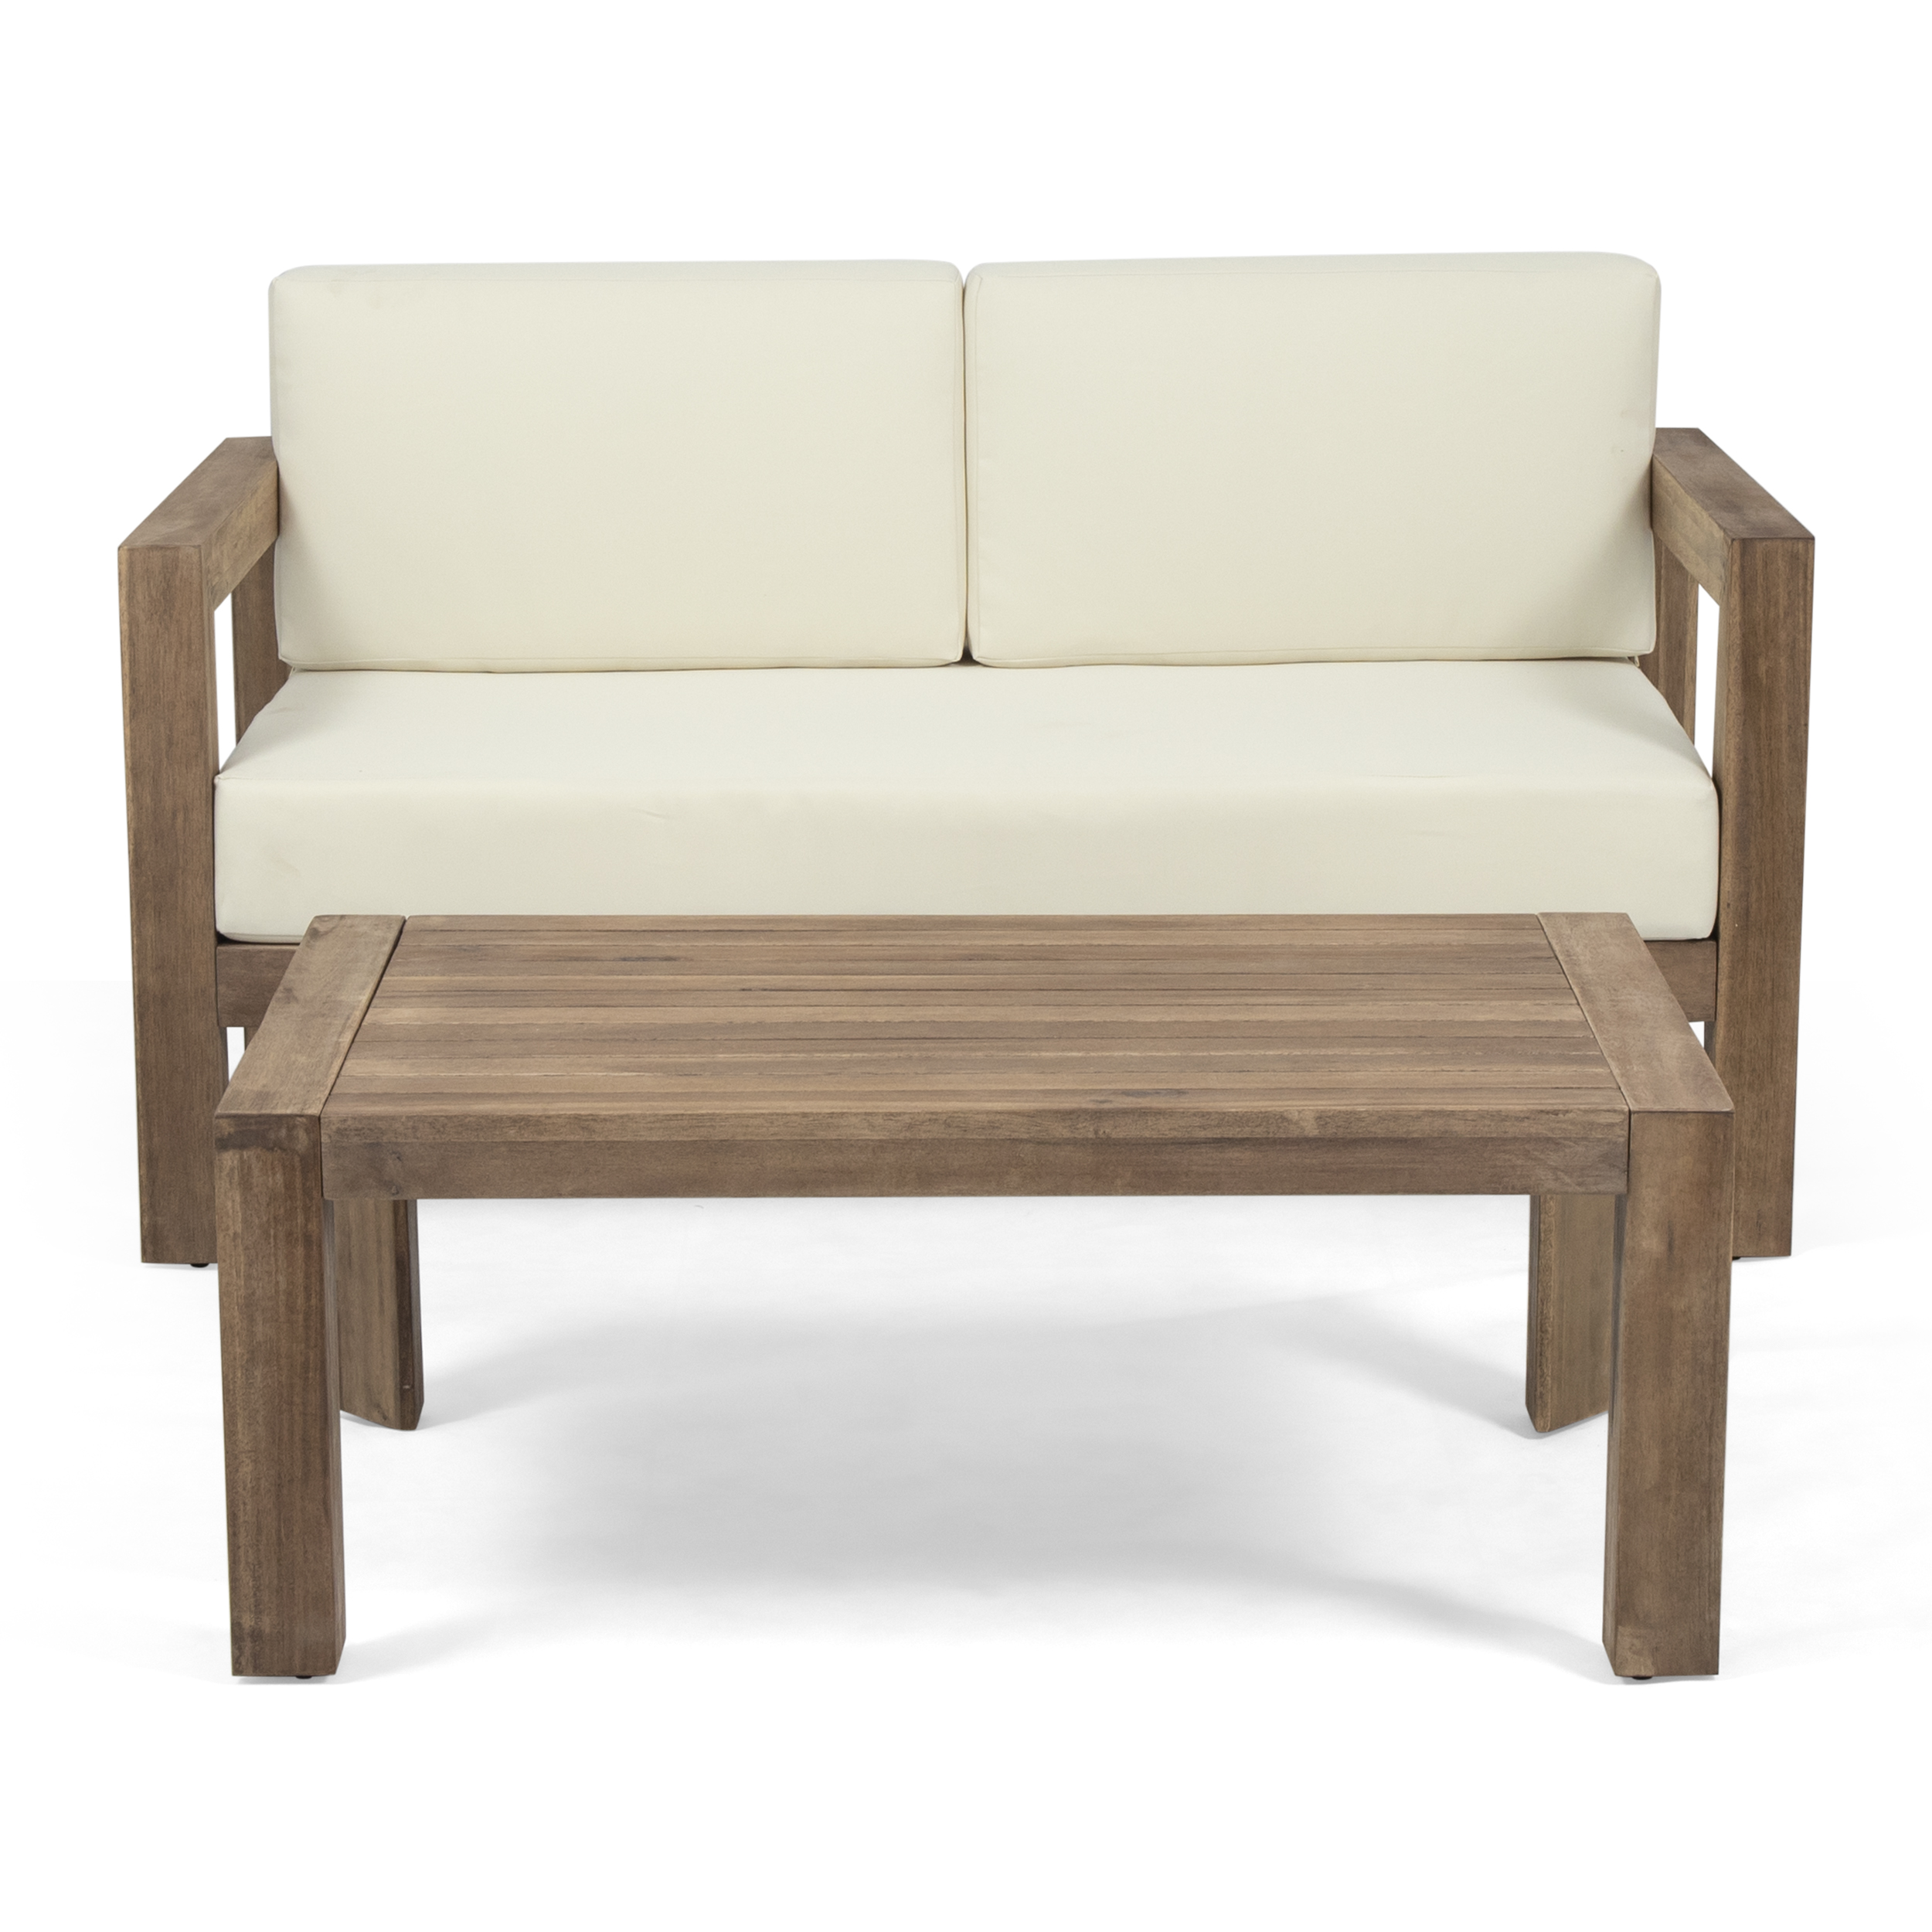 Noble House Genser Outdoor Wood Loveseat and Coffee Table in Beige - image 4 of 10